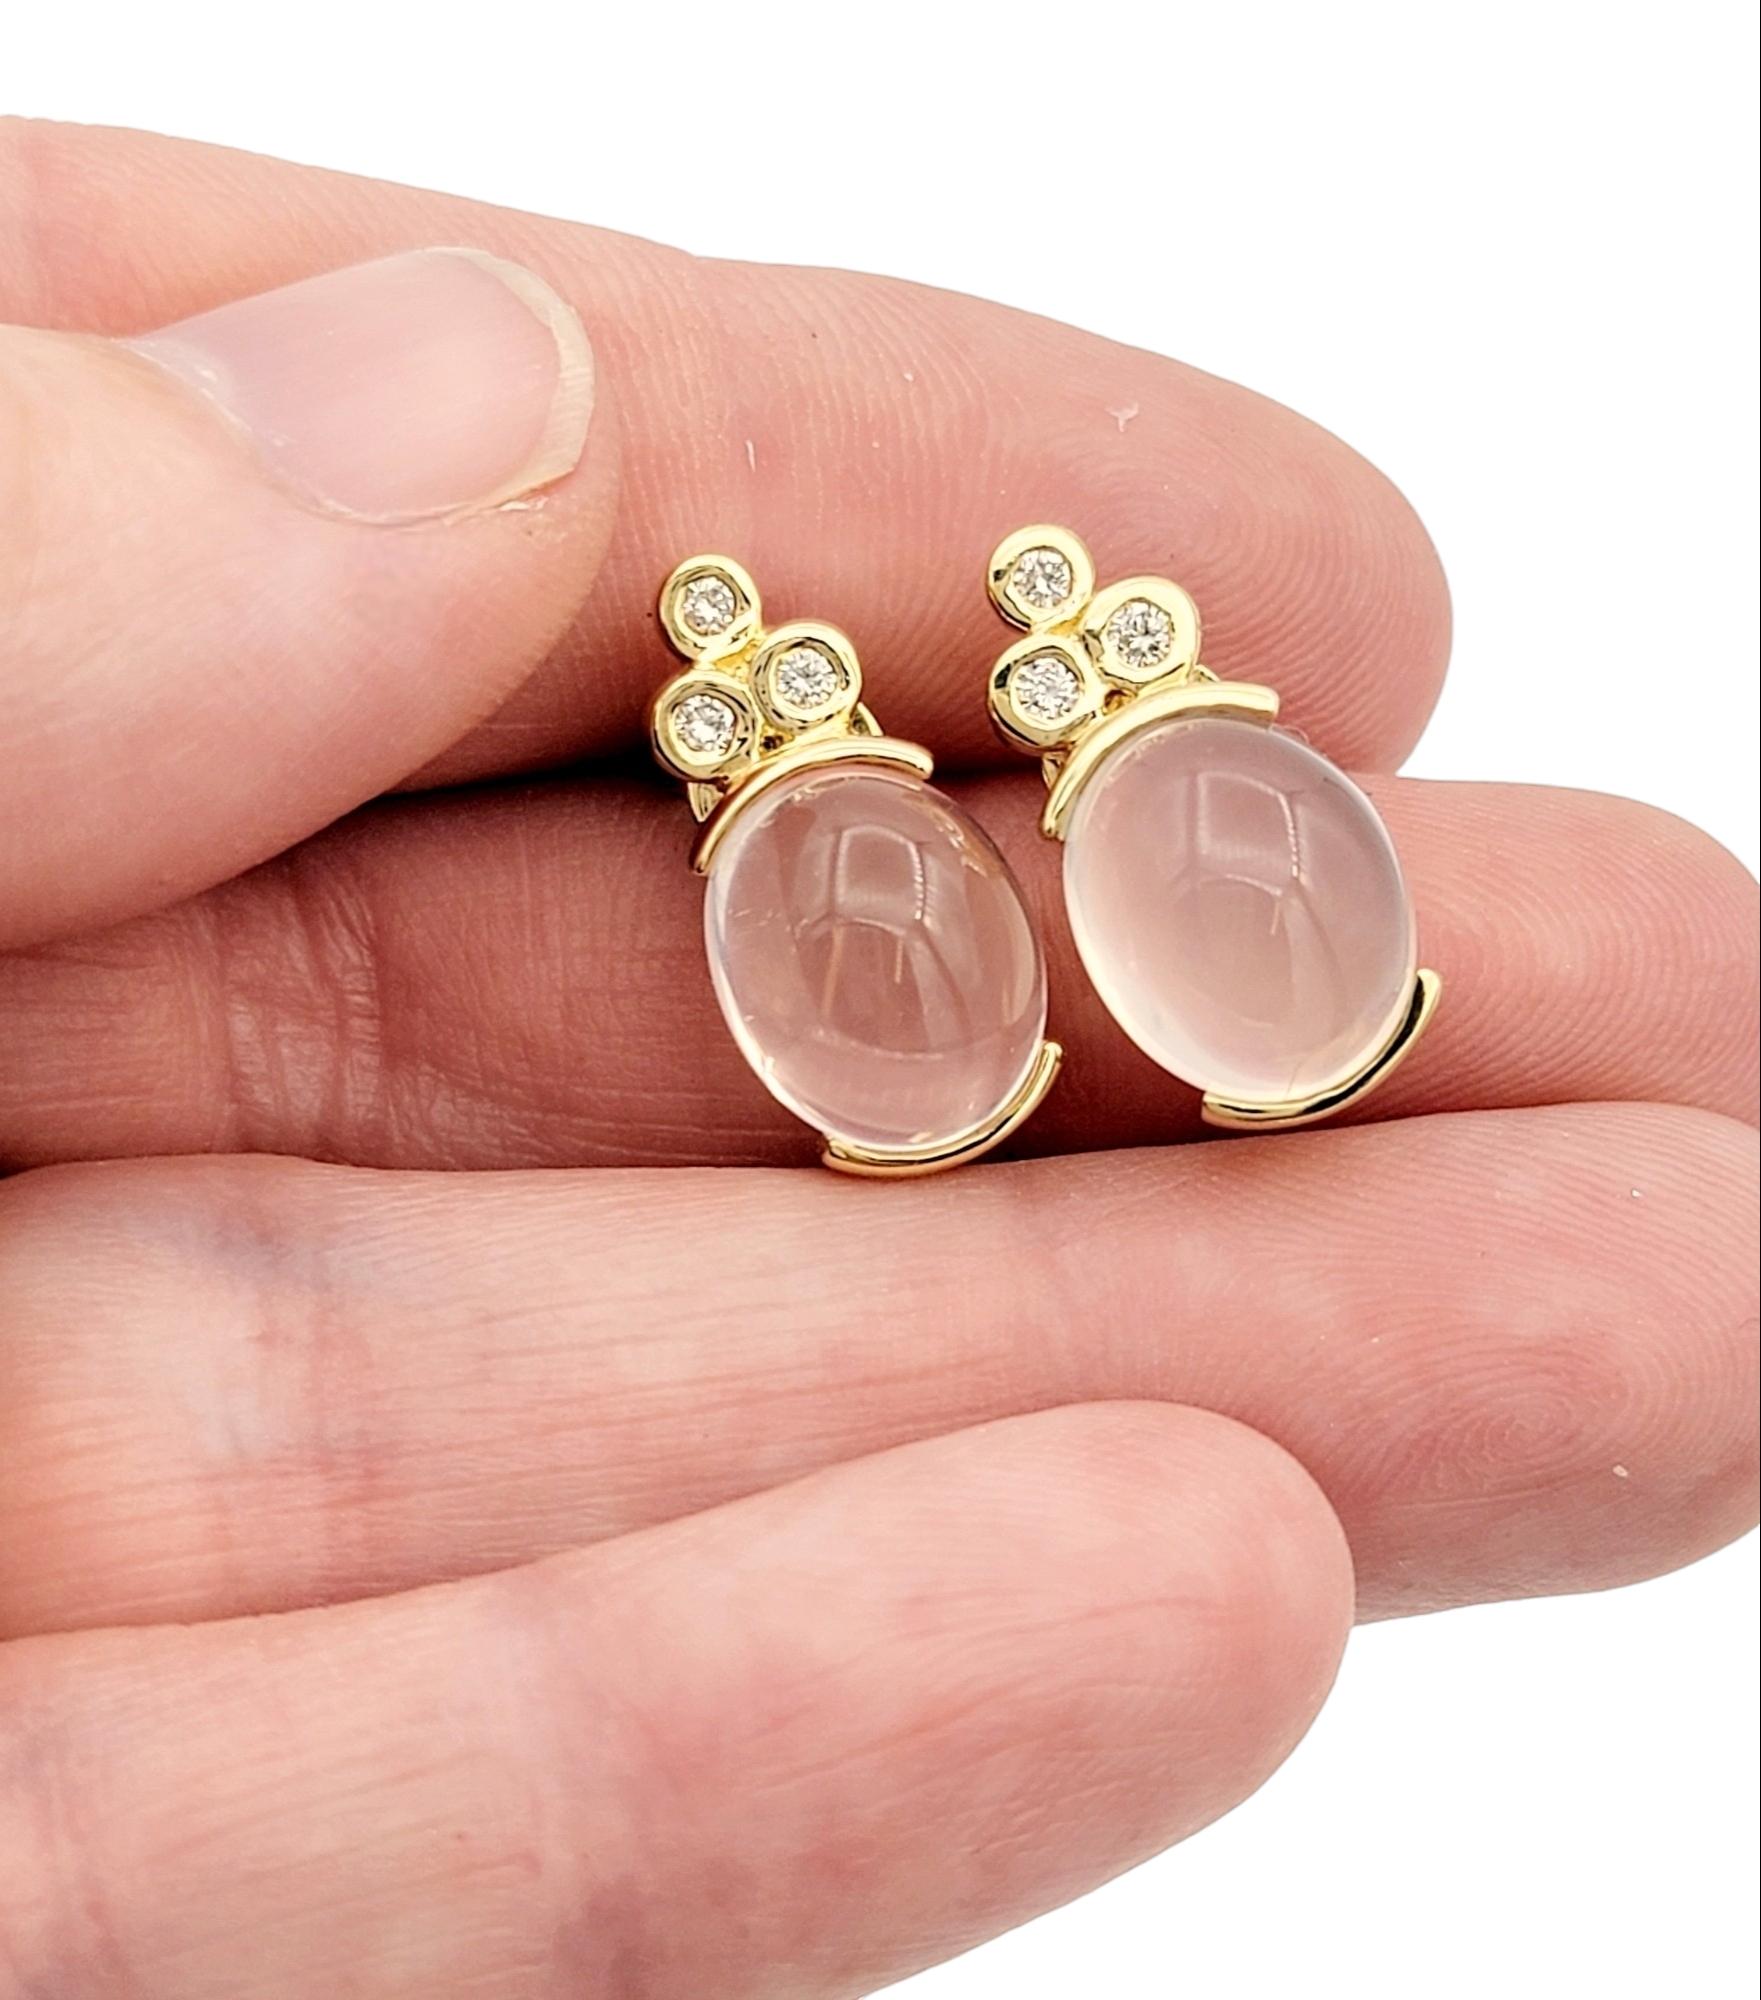 Cabochon Rose Quartz and Round Diamond Stud Earrings Set in 14 Karat Yellow Gold For Sale 1